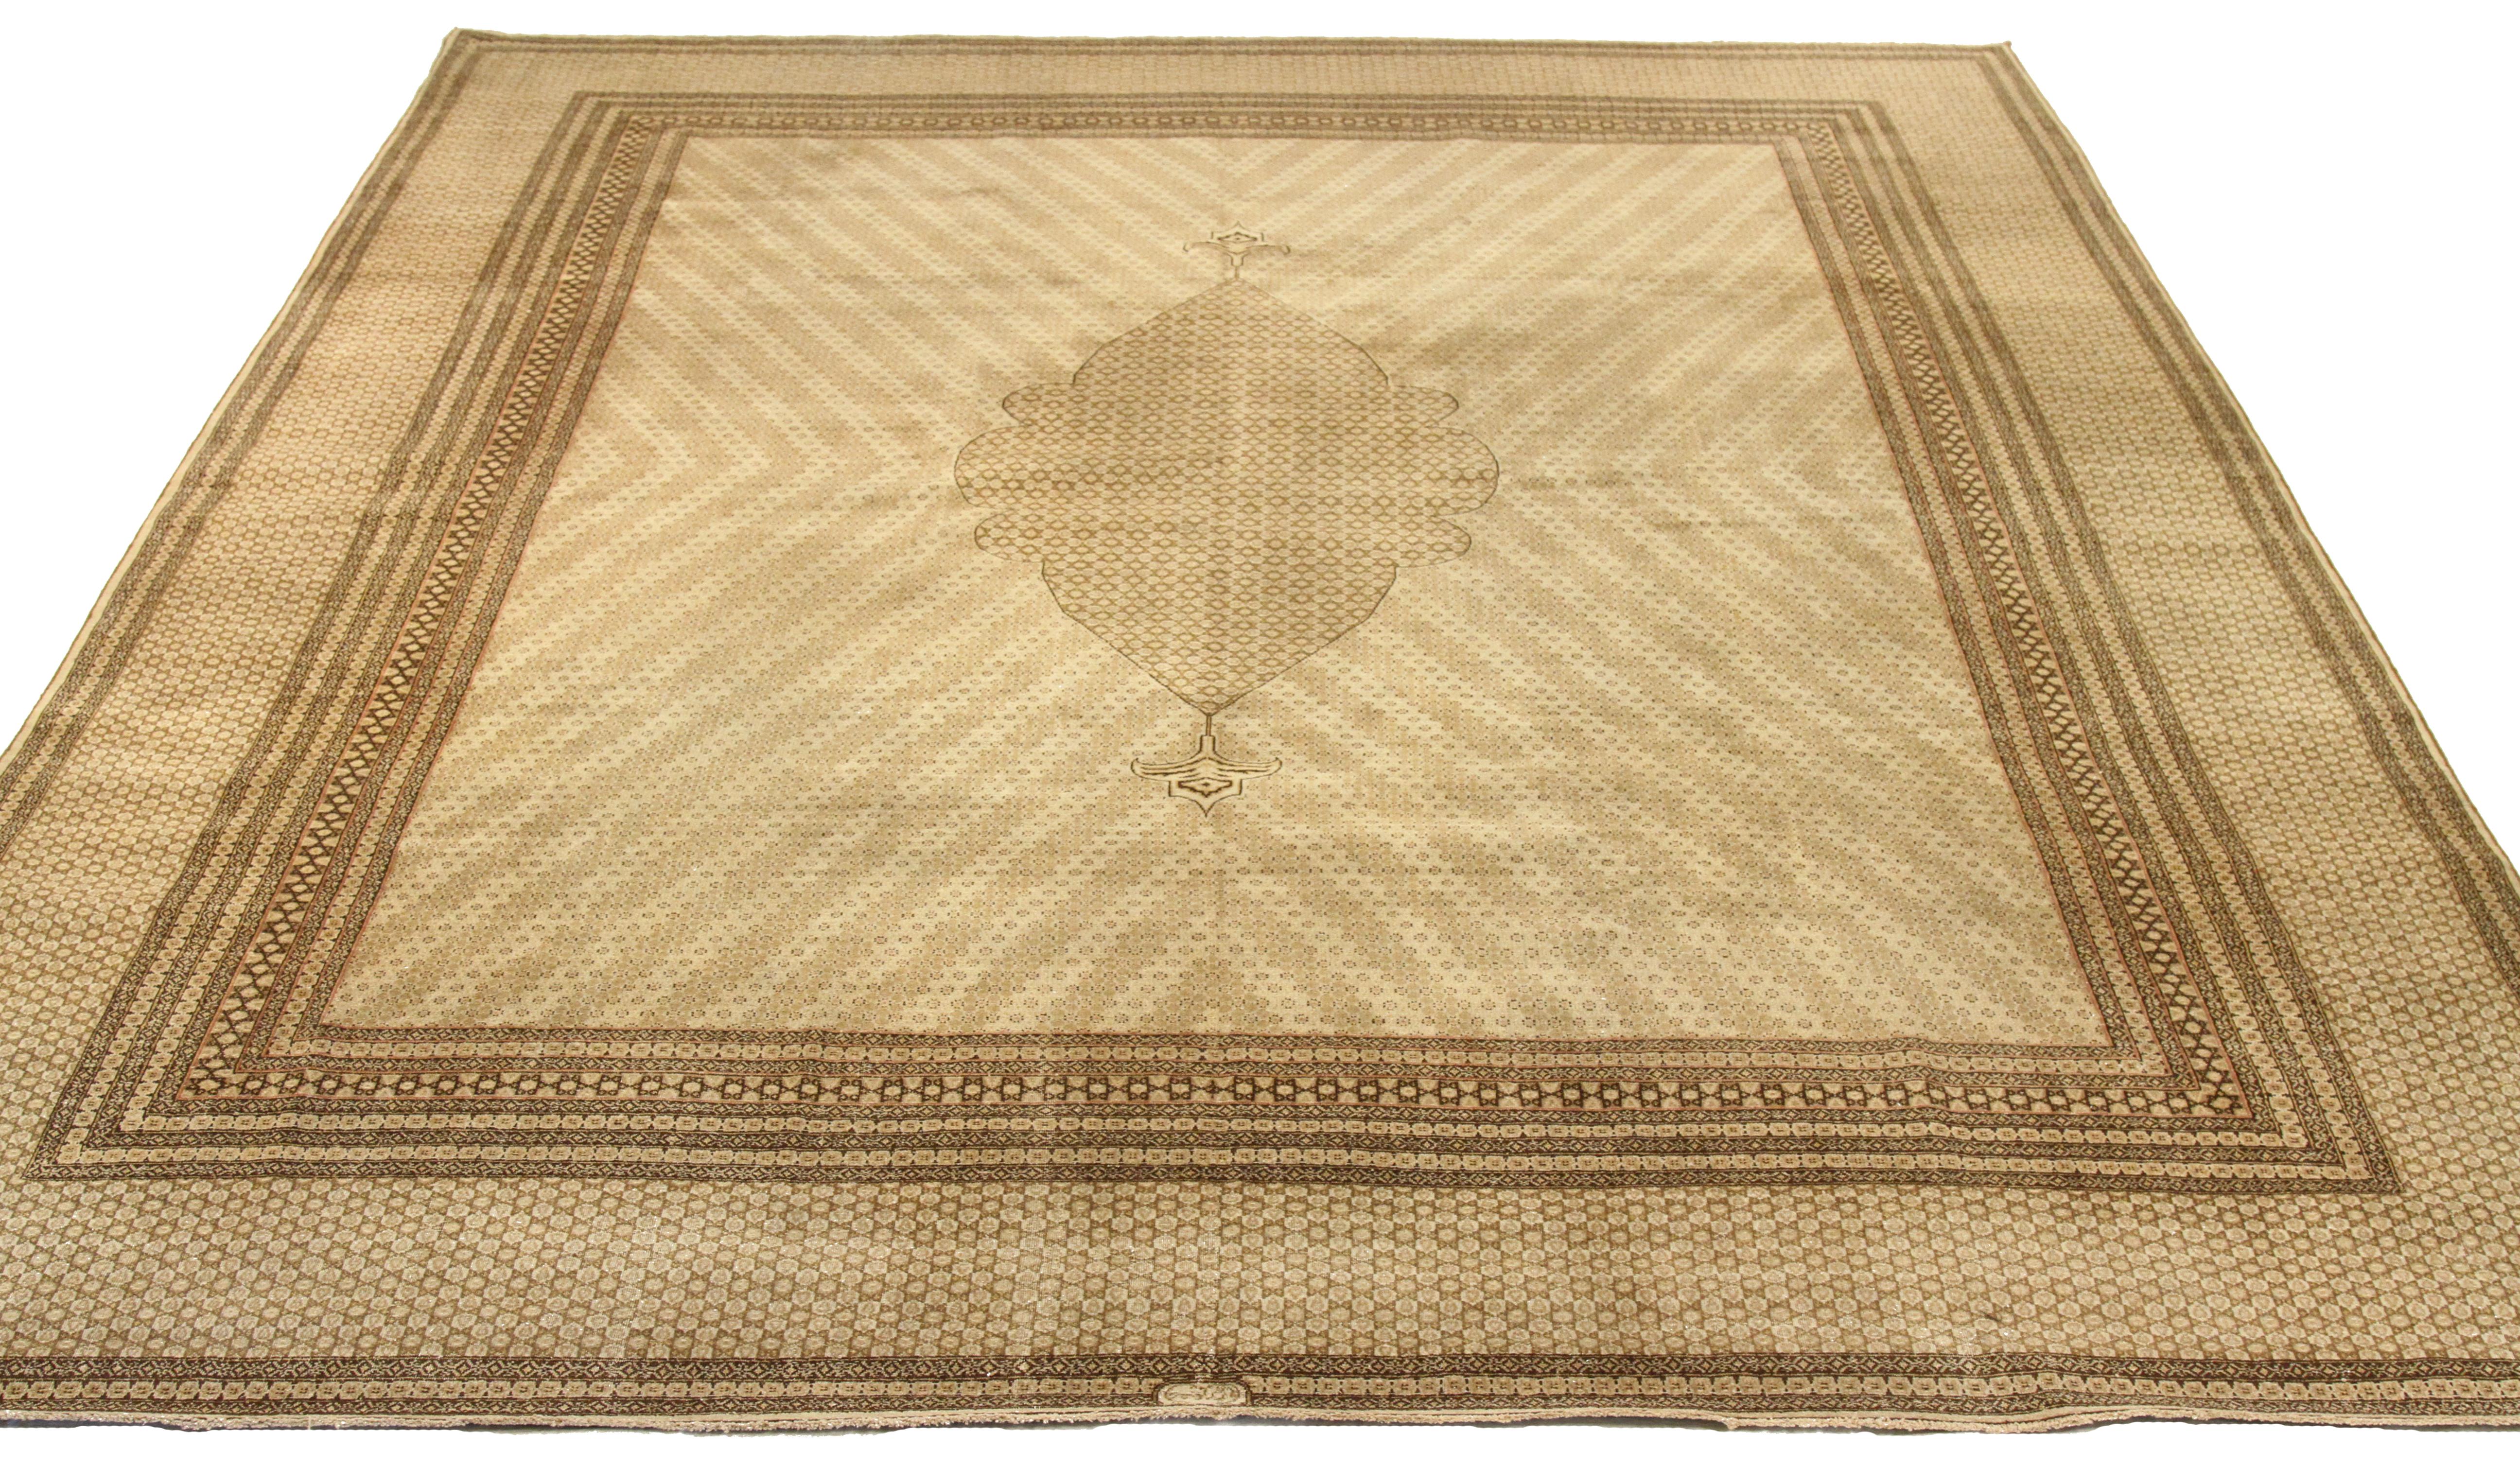 Antique hand-woven Persian area rug made from fine wool and all-natural vegetable dyes that are safe for people and pets. It features traditional Kerman weaving depicting 